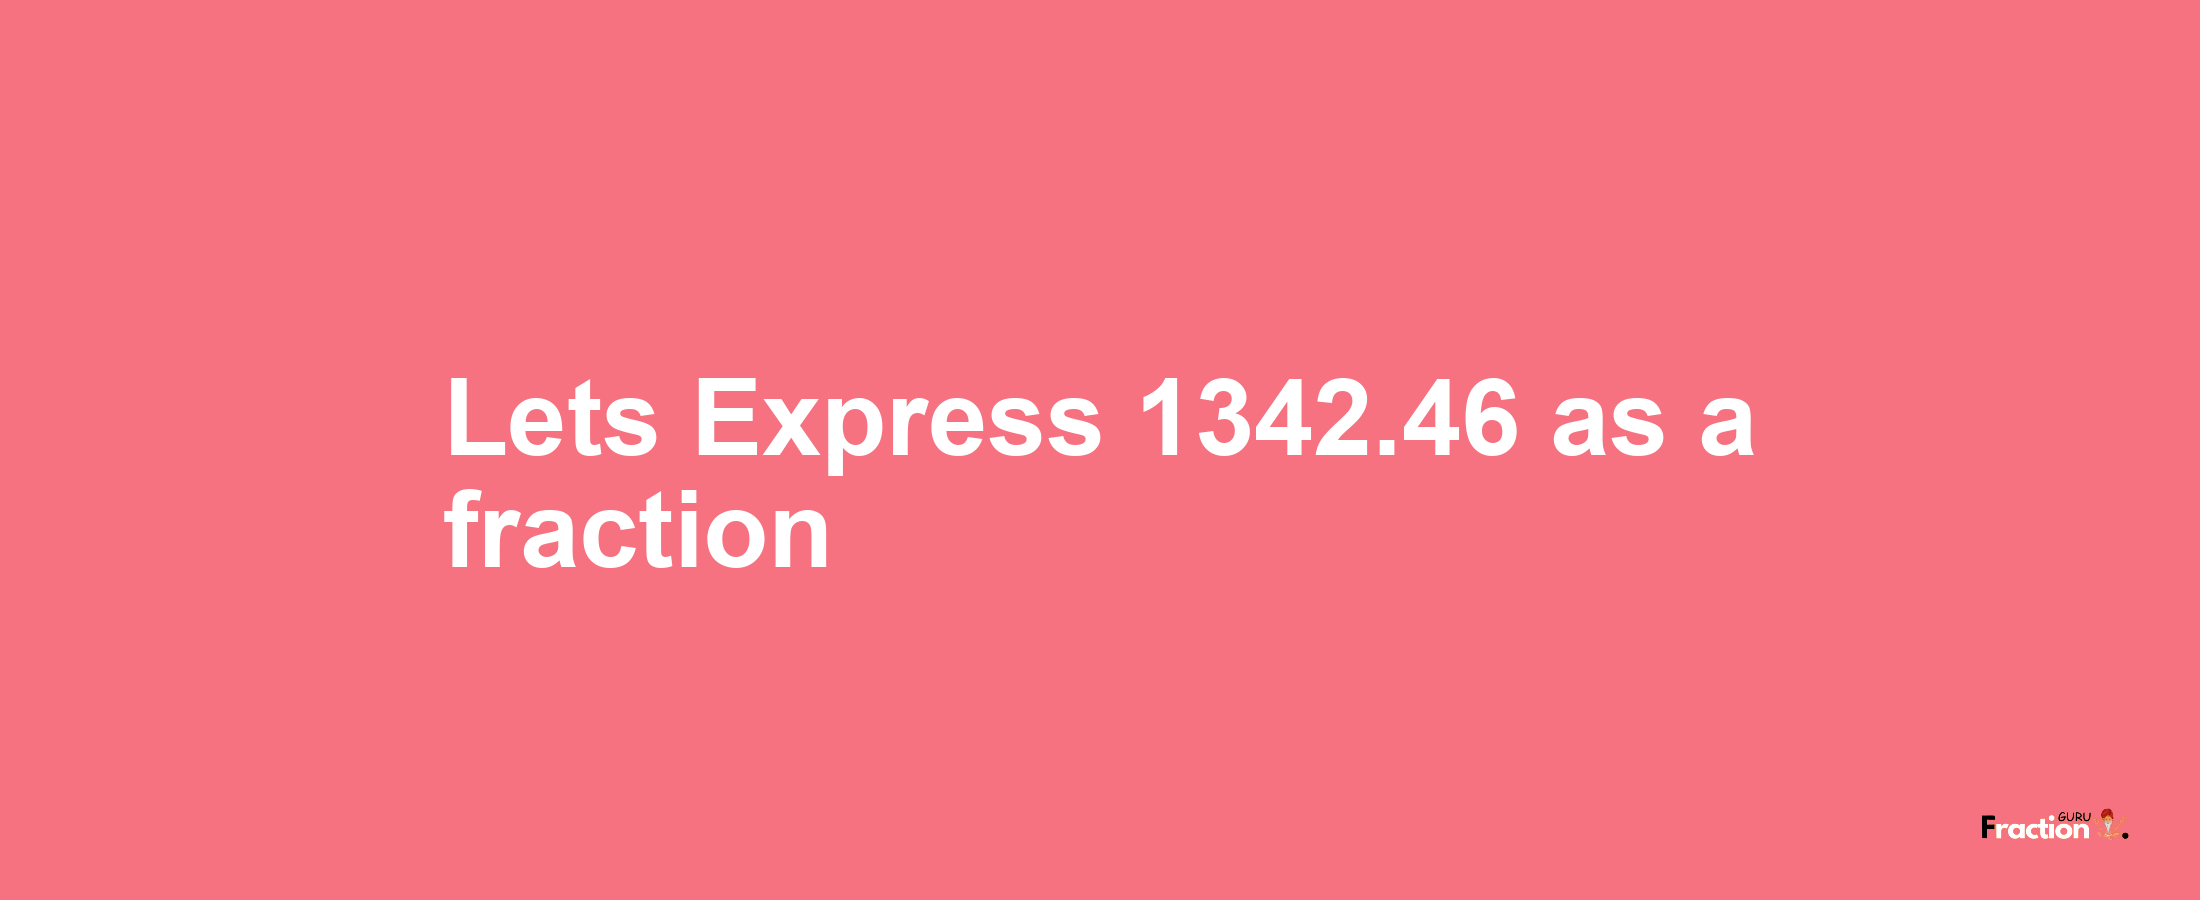 Lets Express 1342.46 as afraction